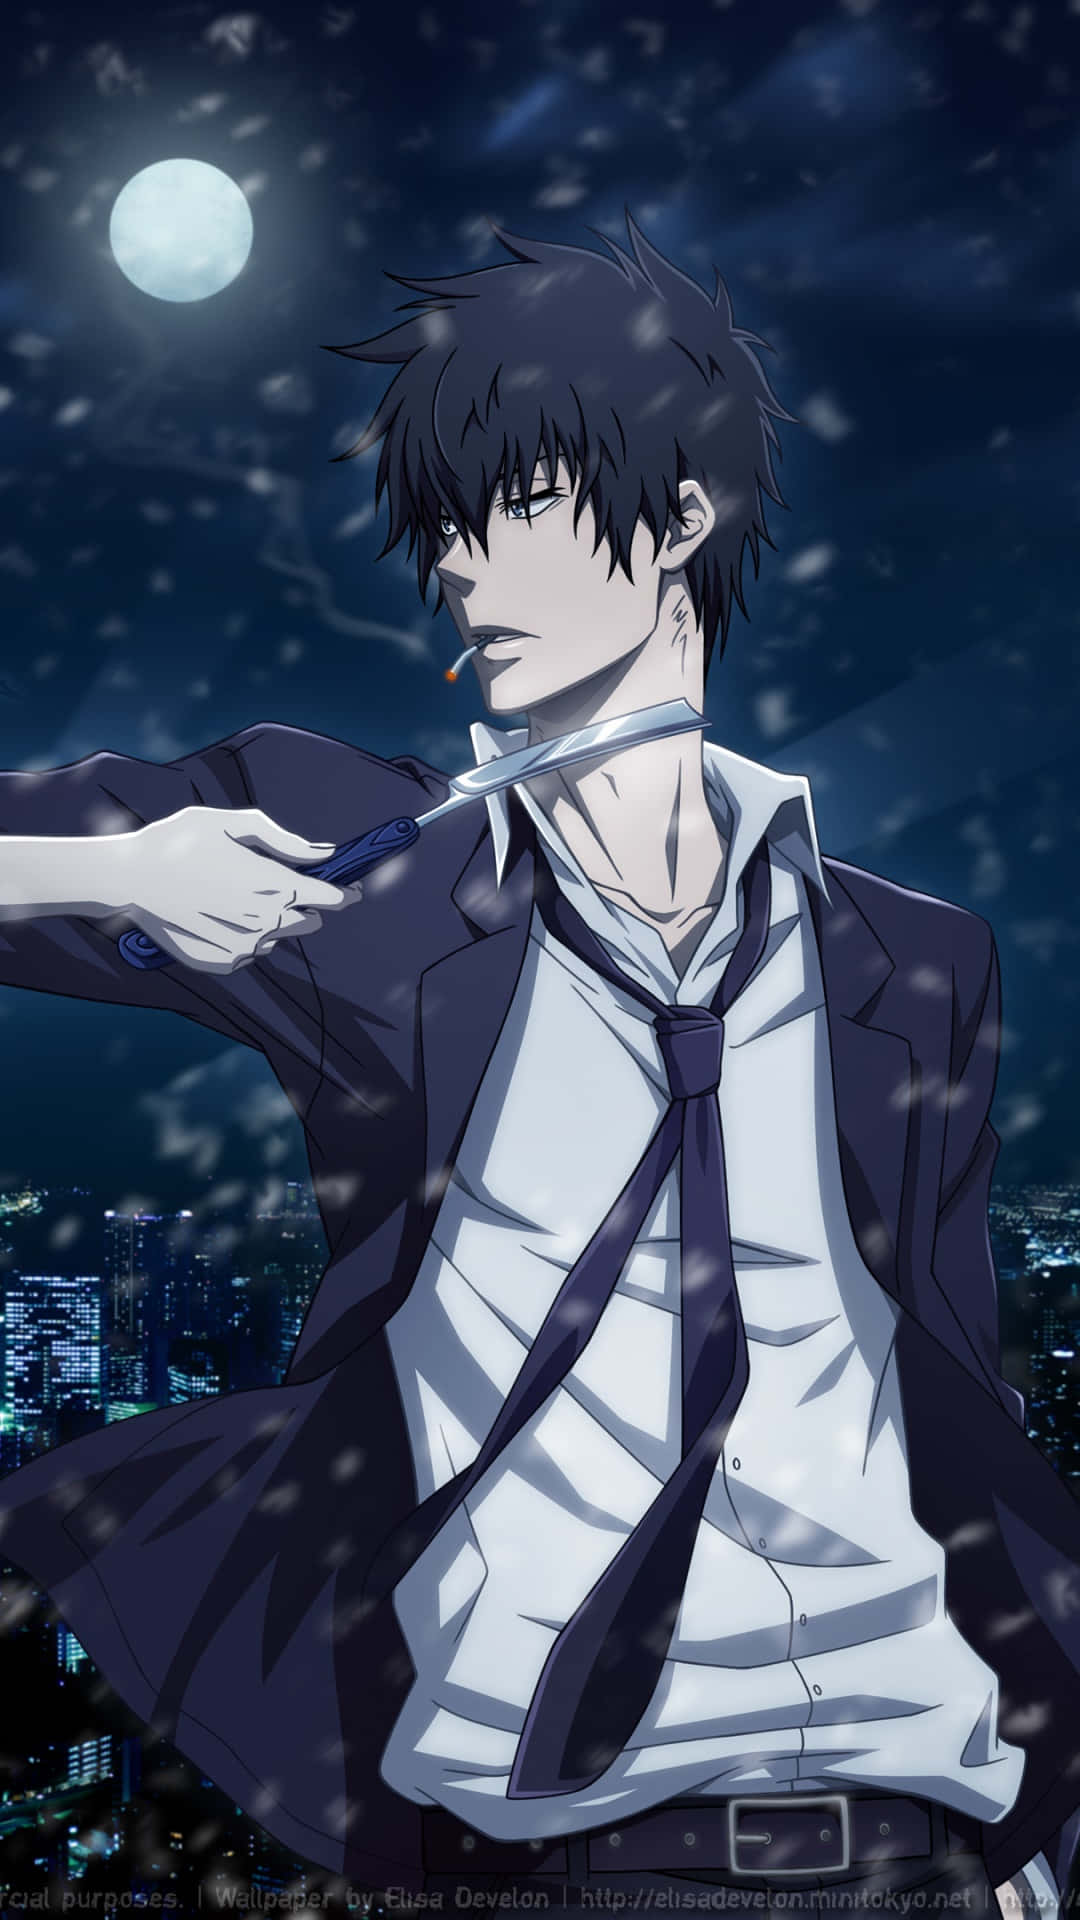 Dive into the Dystopian, Cyberpunk World of Psycho Pass. Wallpaper